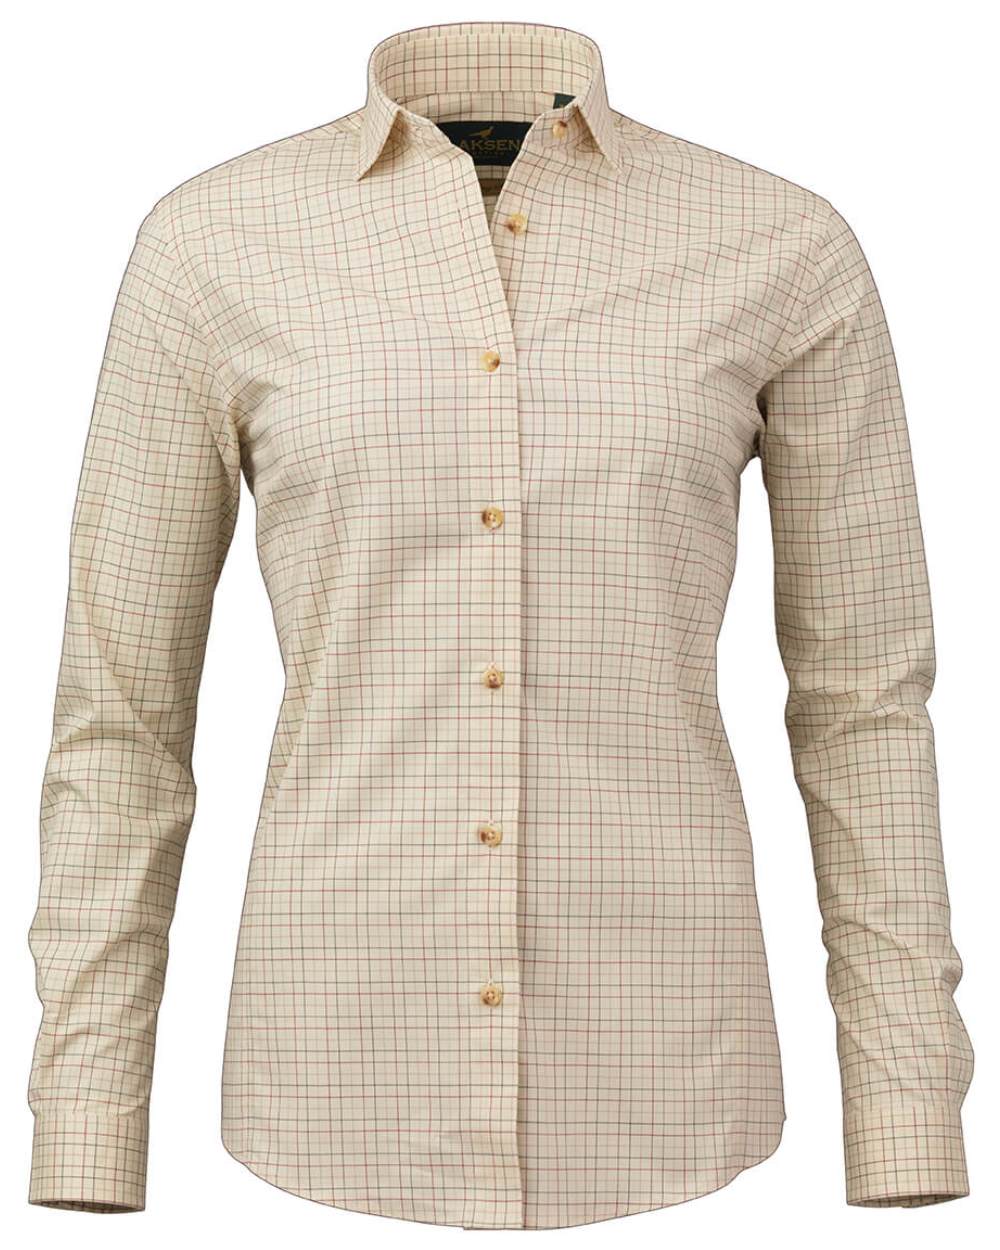 Olive/Old Red/Sand Coloured Laksen Ava Sporting Stretch Shirt On A White Background